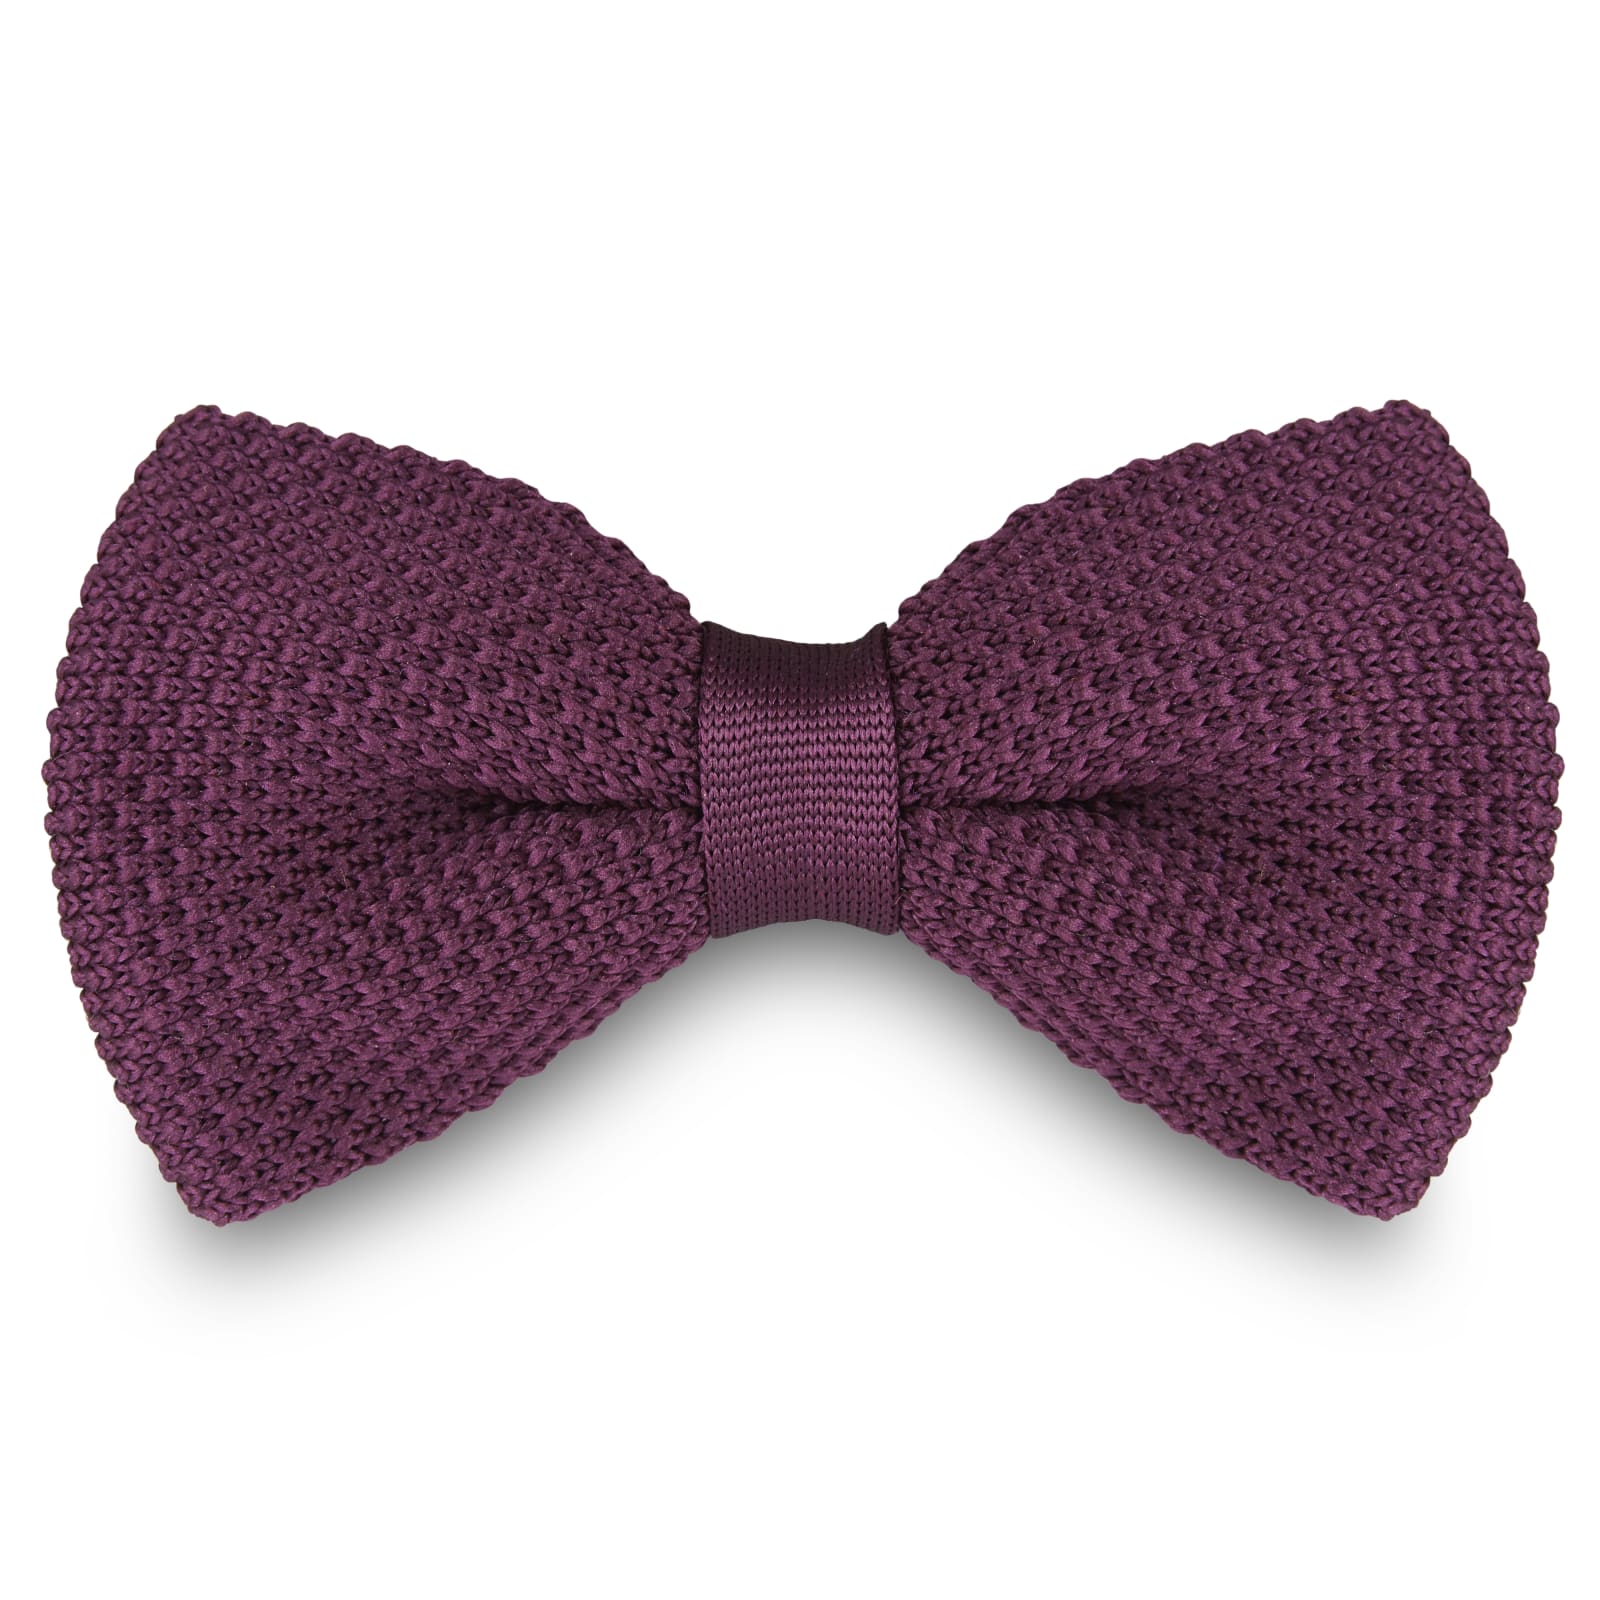 KNITTED PURPLE BOW TIES